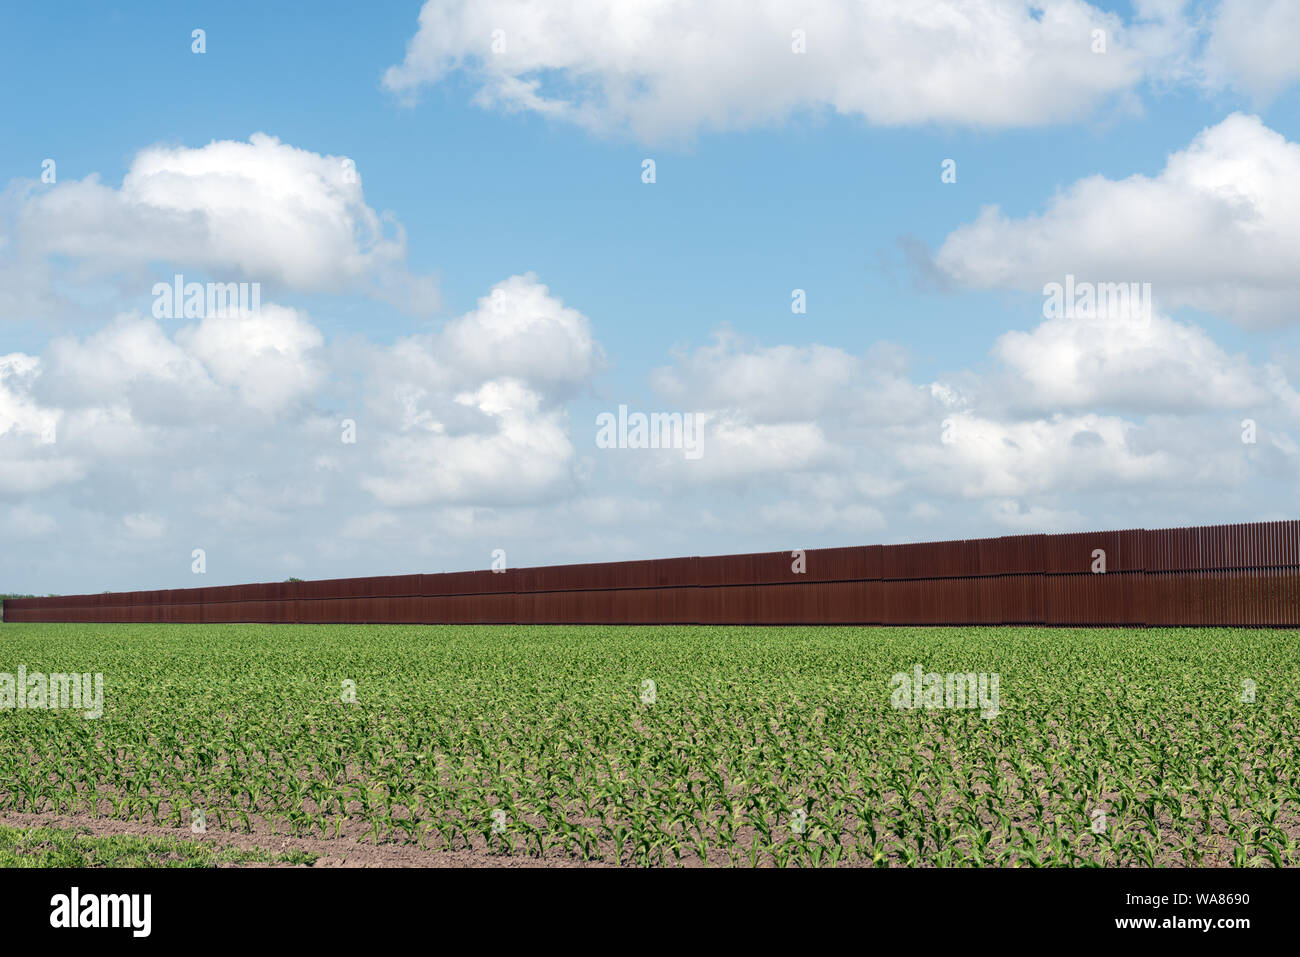 By design there is a gap in the United States-Mexican border-security fence. It allows U.S. travelers to visit the Rabb Plantation, part of the Sabal Palm Sanctuary along the Rio Grande, Brownsville, Texas Stock Photo